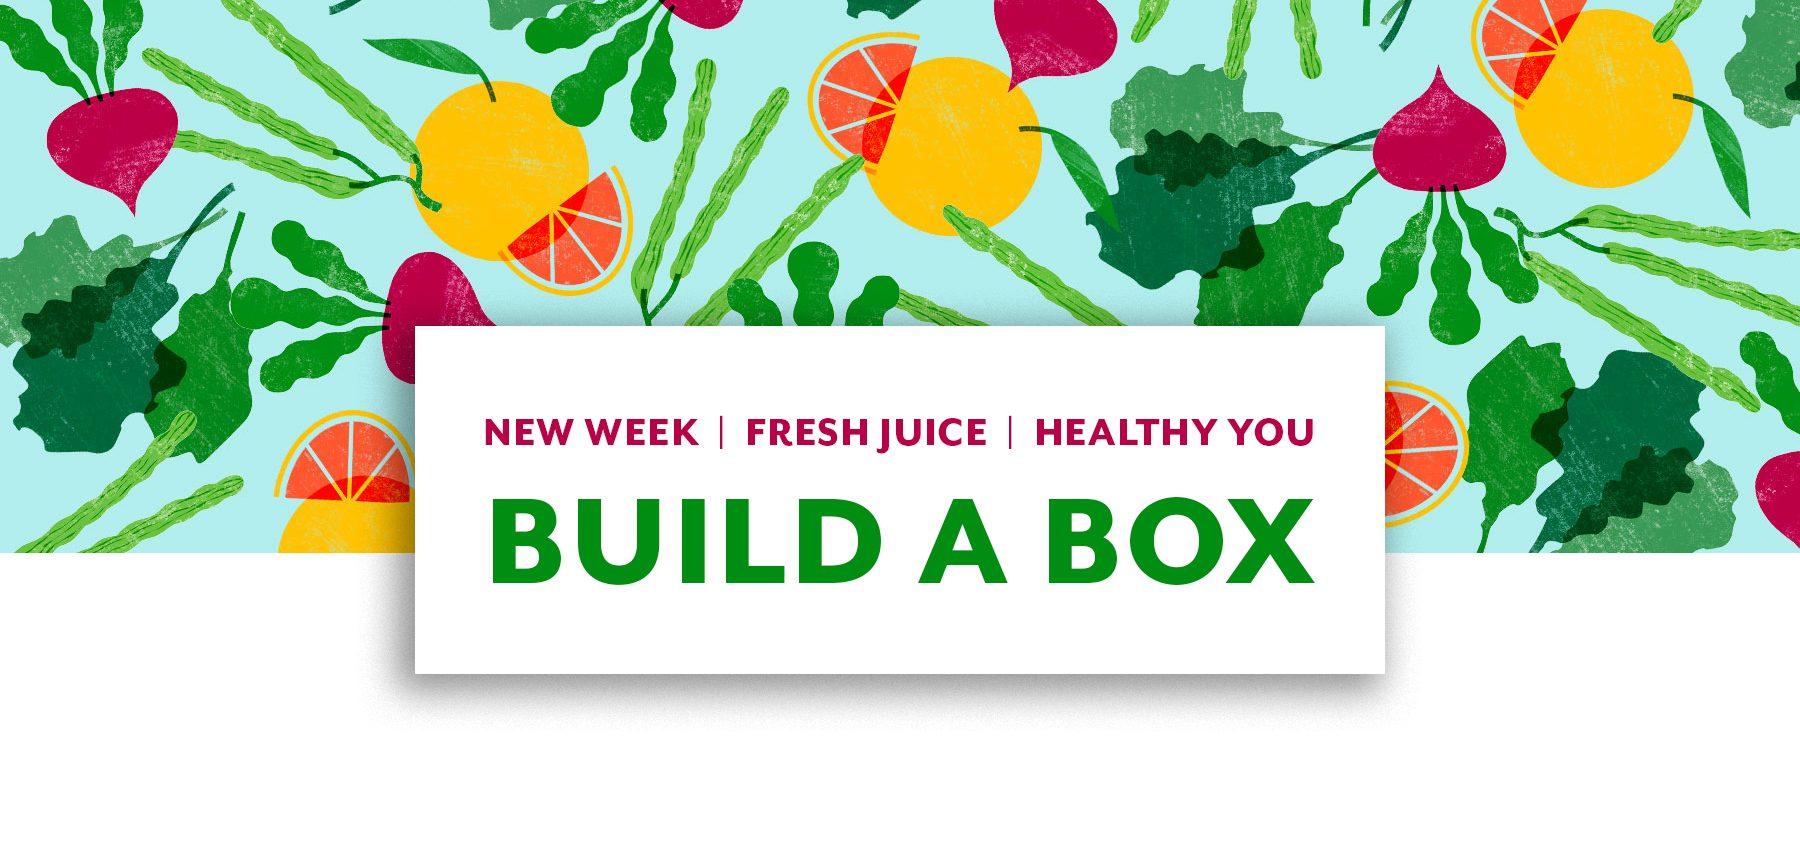 Build-A-Box of 7 Organic Juices